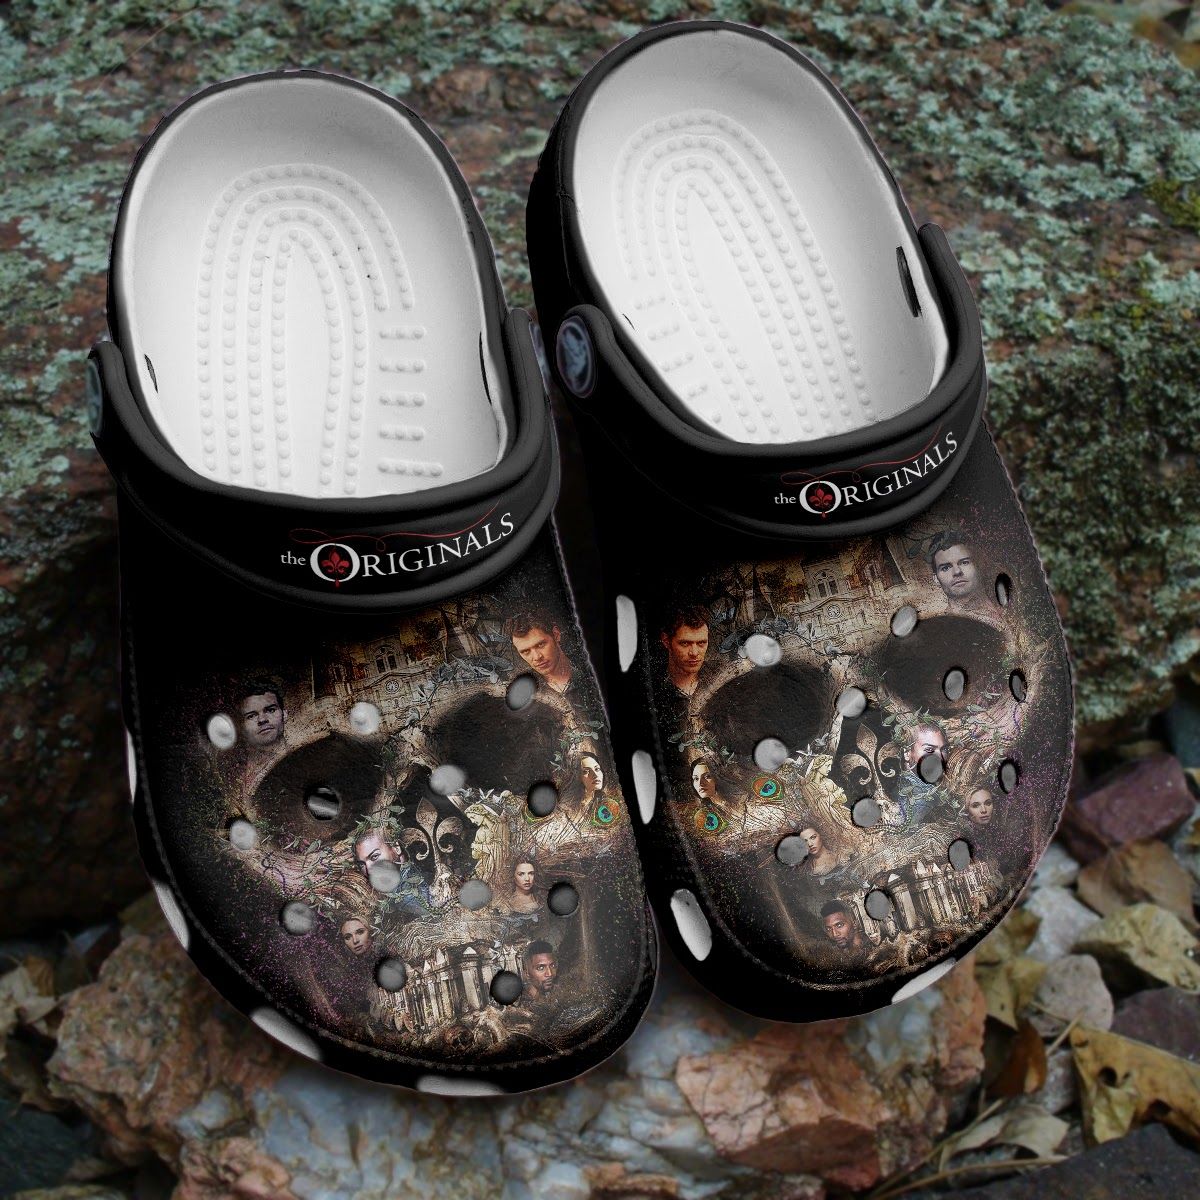 If you'd like to purchase a pair of Crocband Clogs, be sure to check out the official website. 164